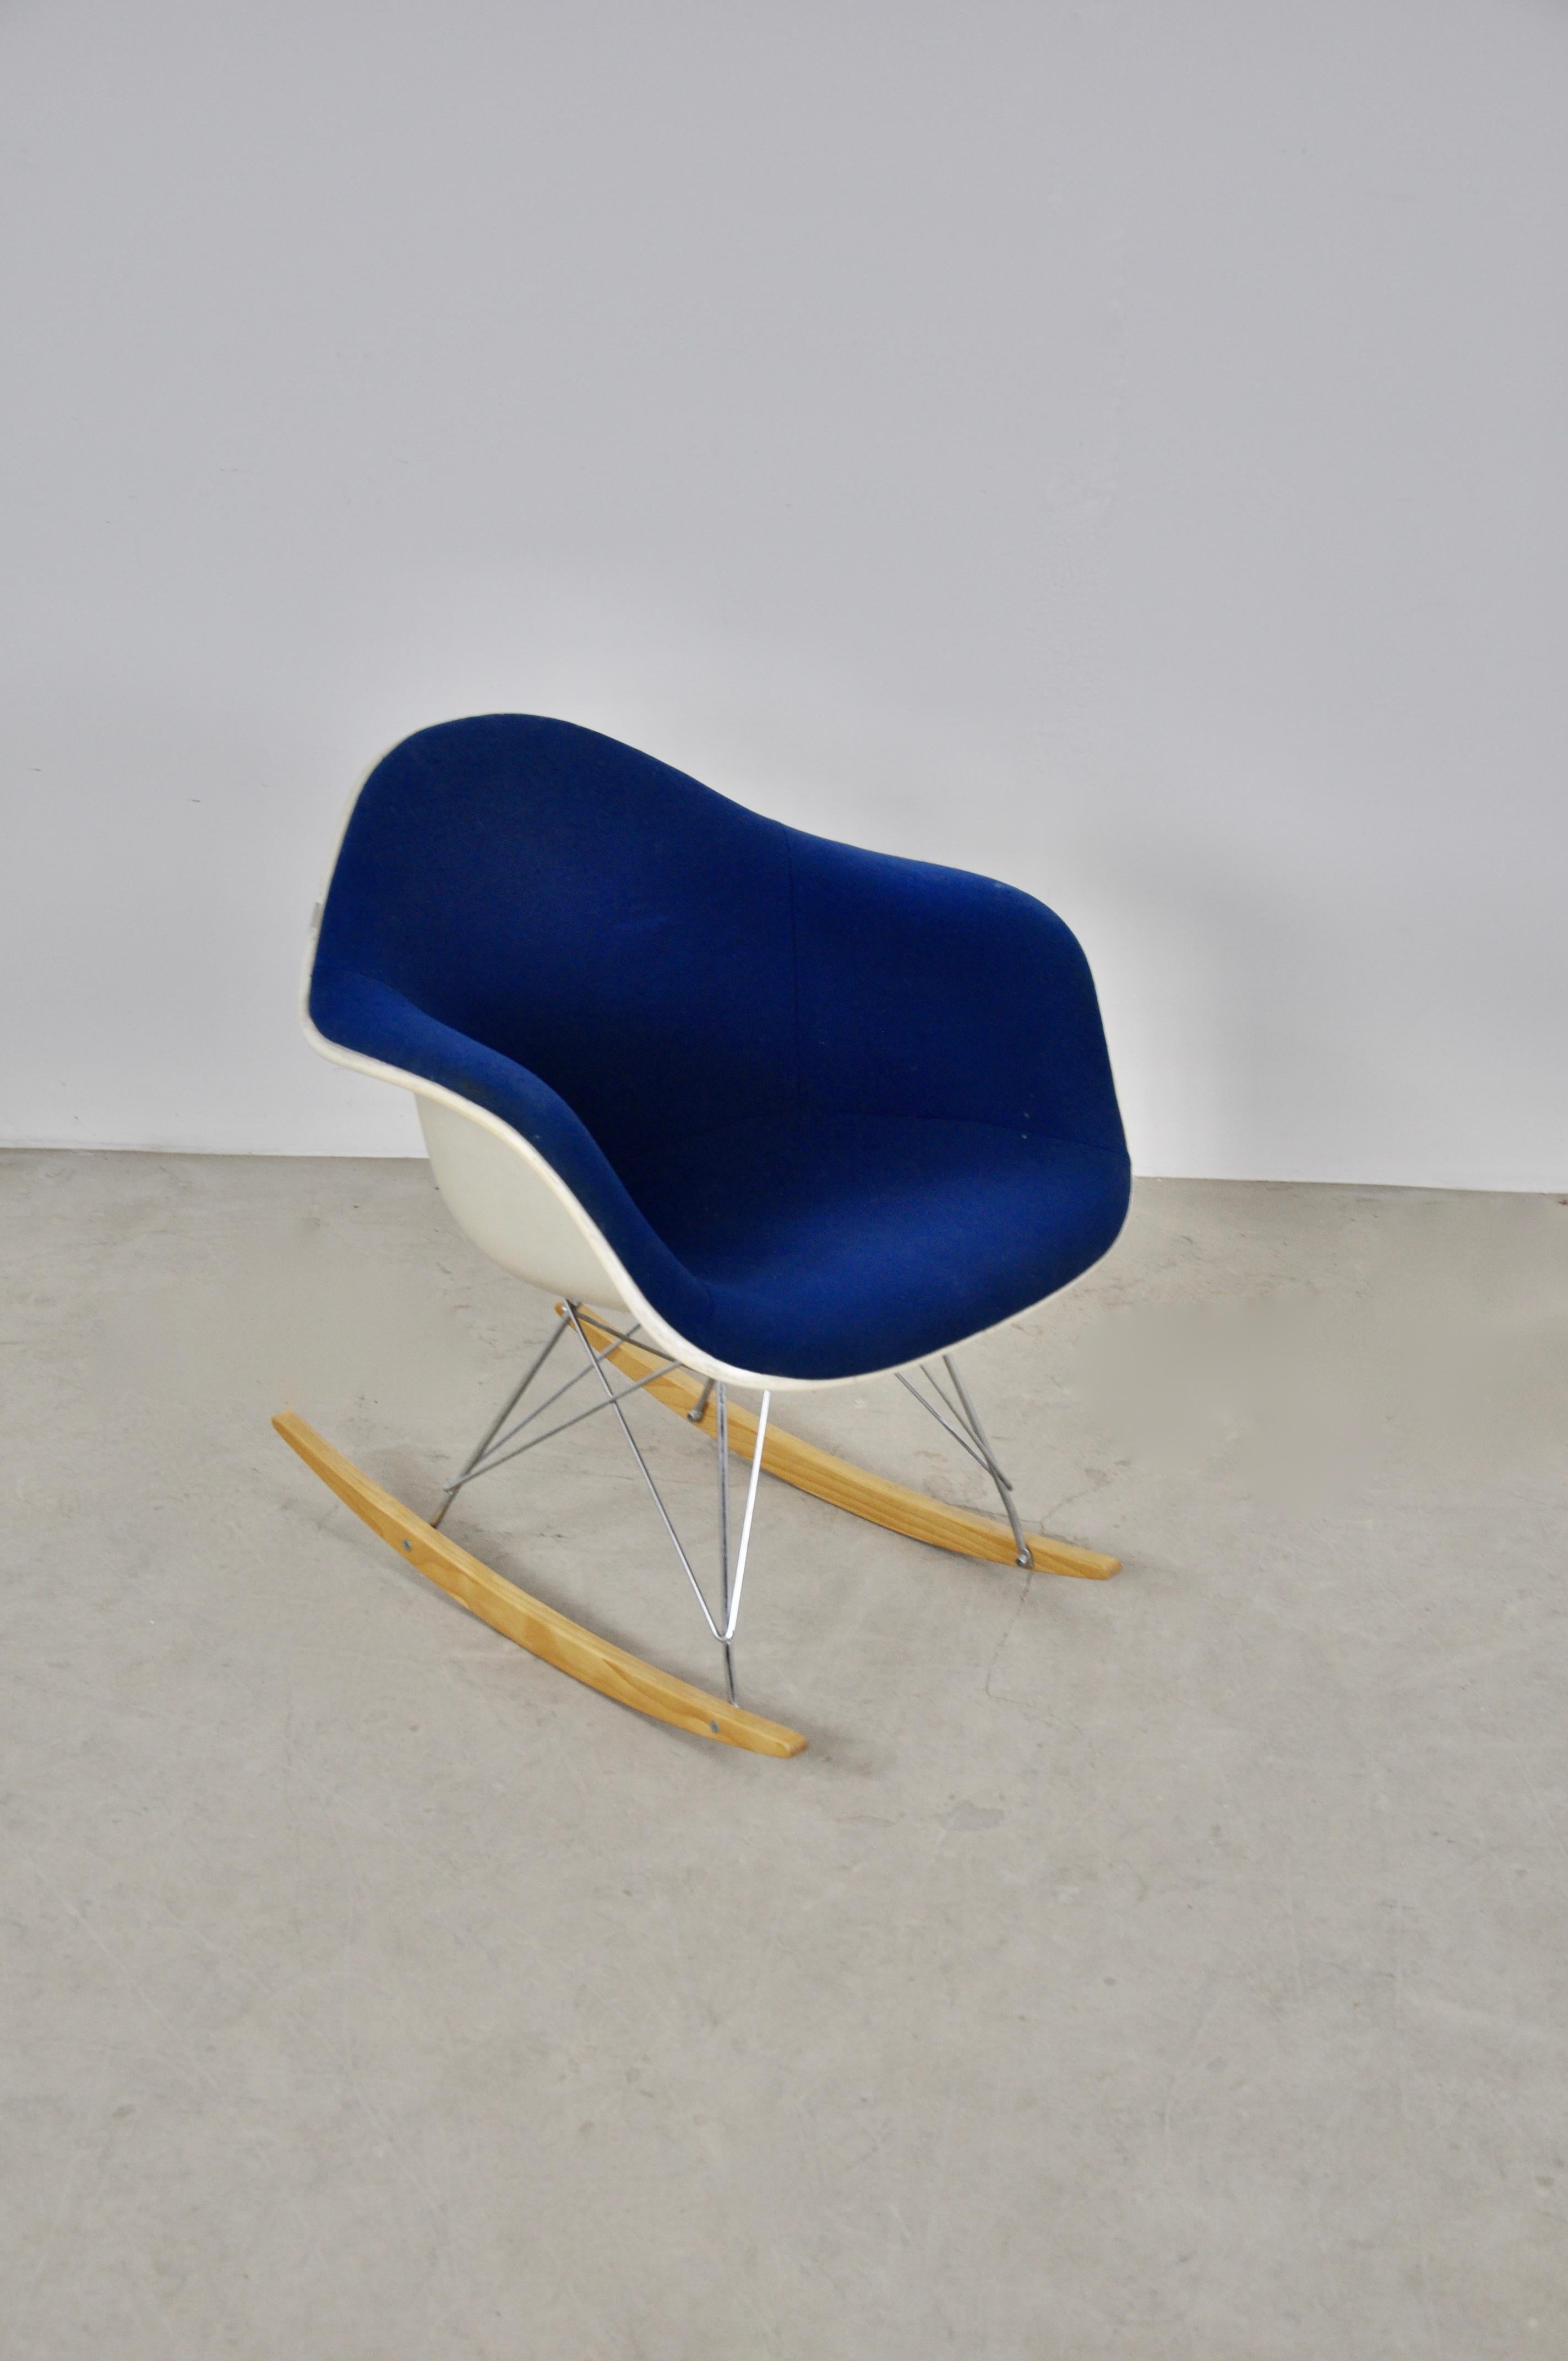 Central American Rocking Chair by Charles & Ray Eames For Herman Miller, 1960s